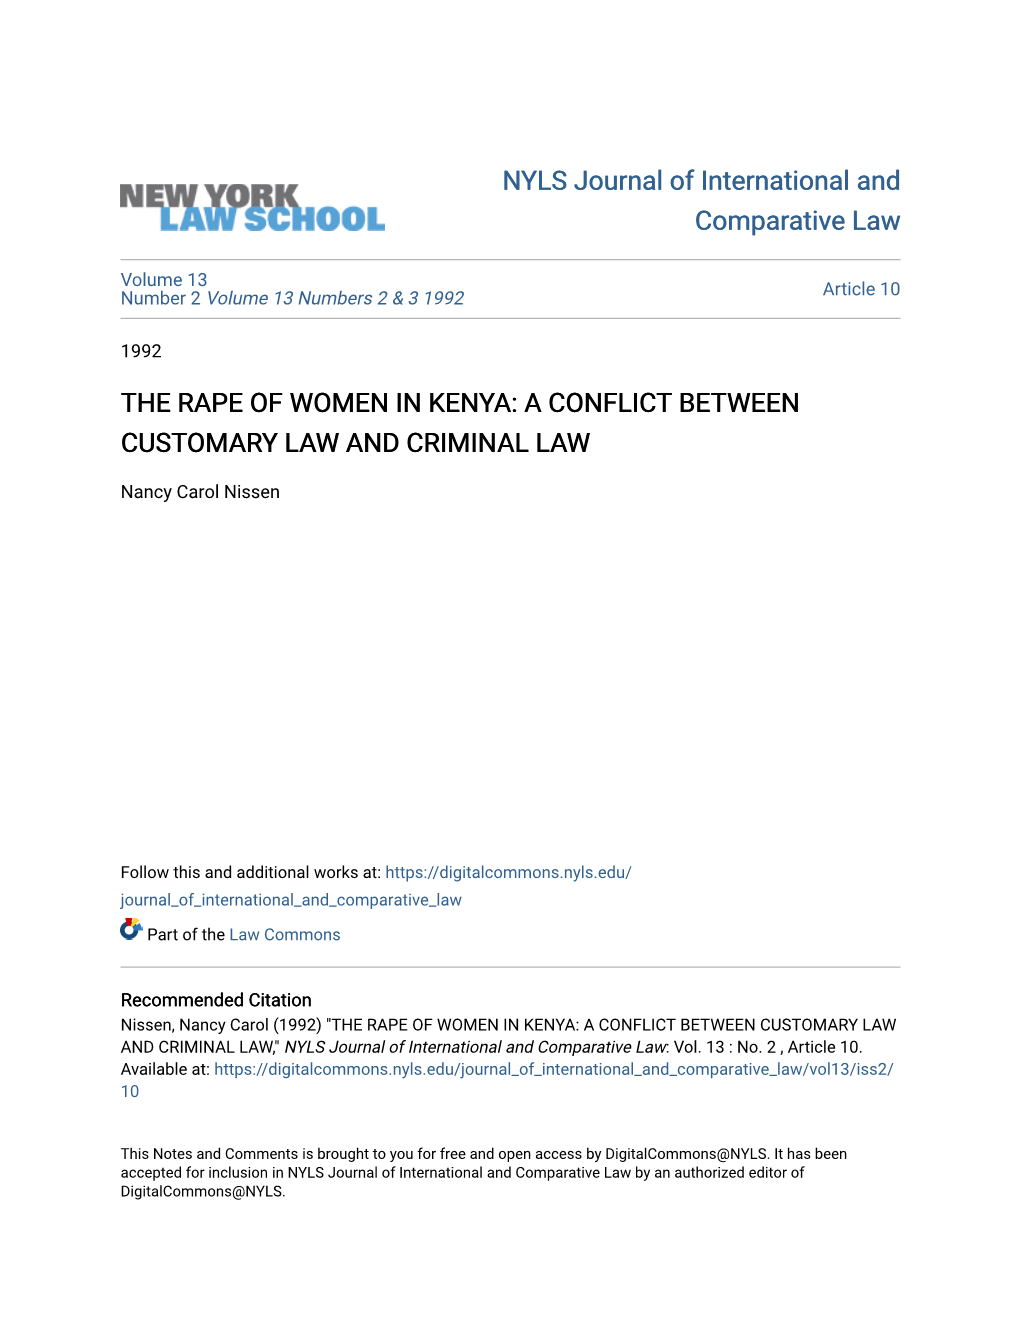 The Rape of Women in Kenya: a Conflict Between Customary Law and Criminal Law